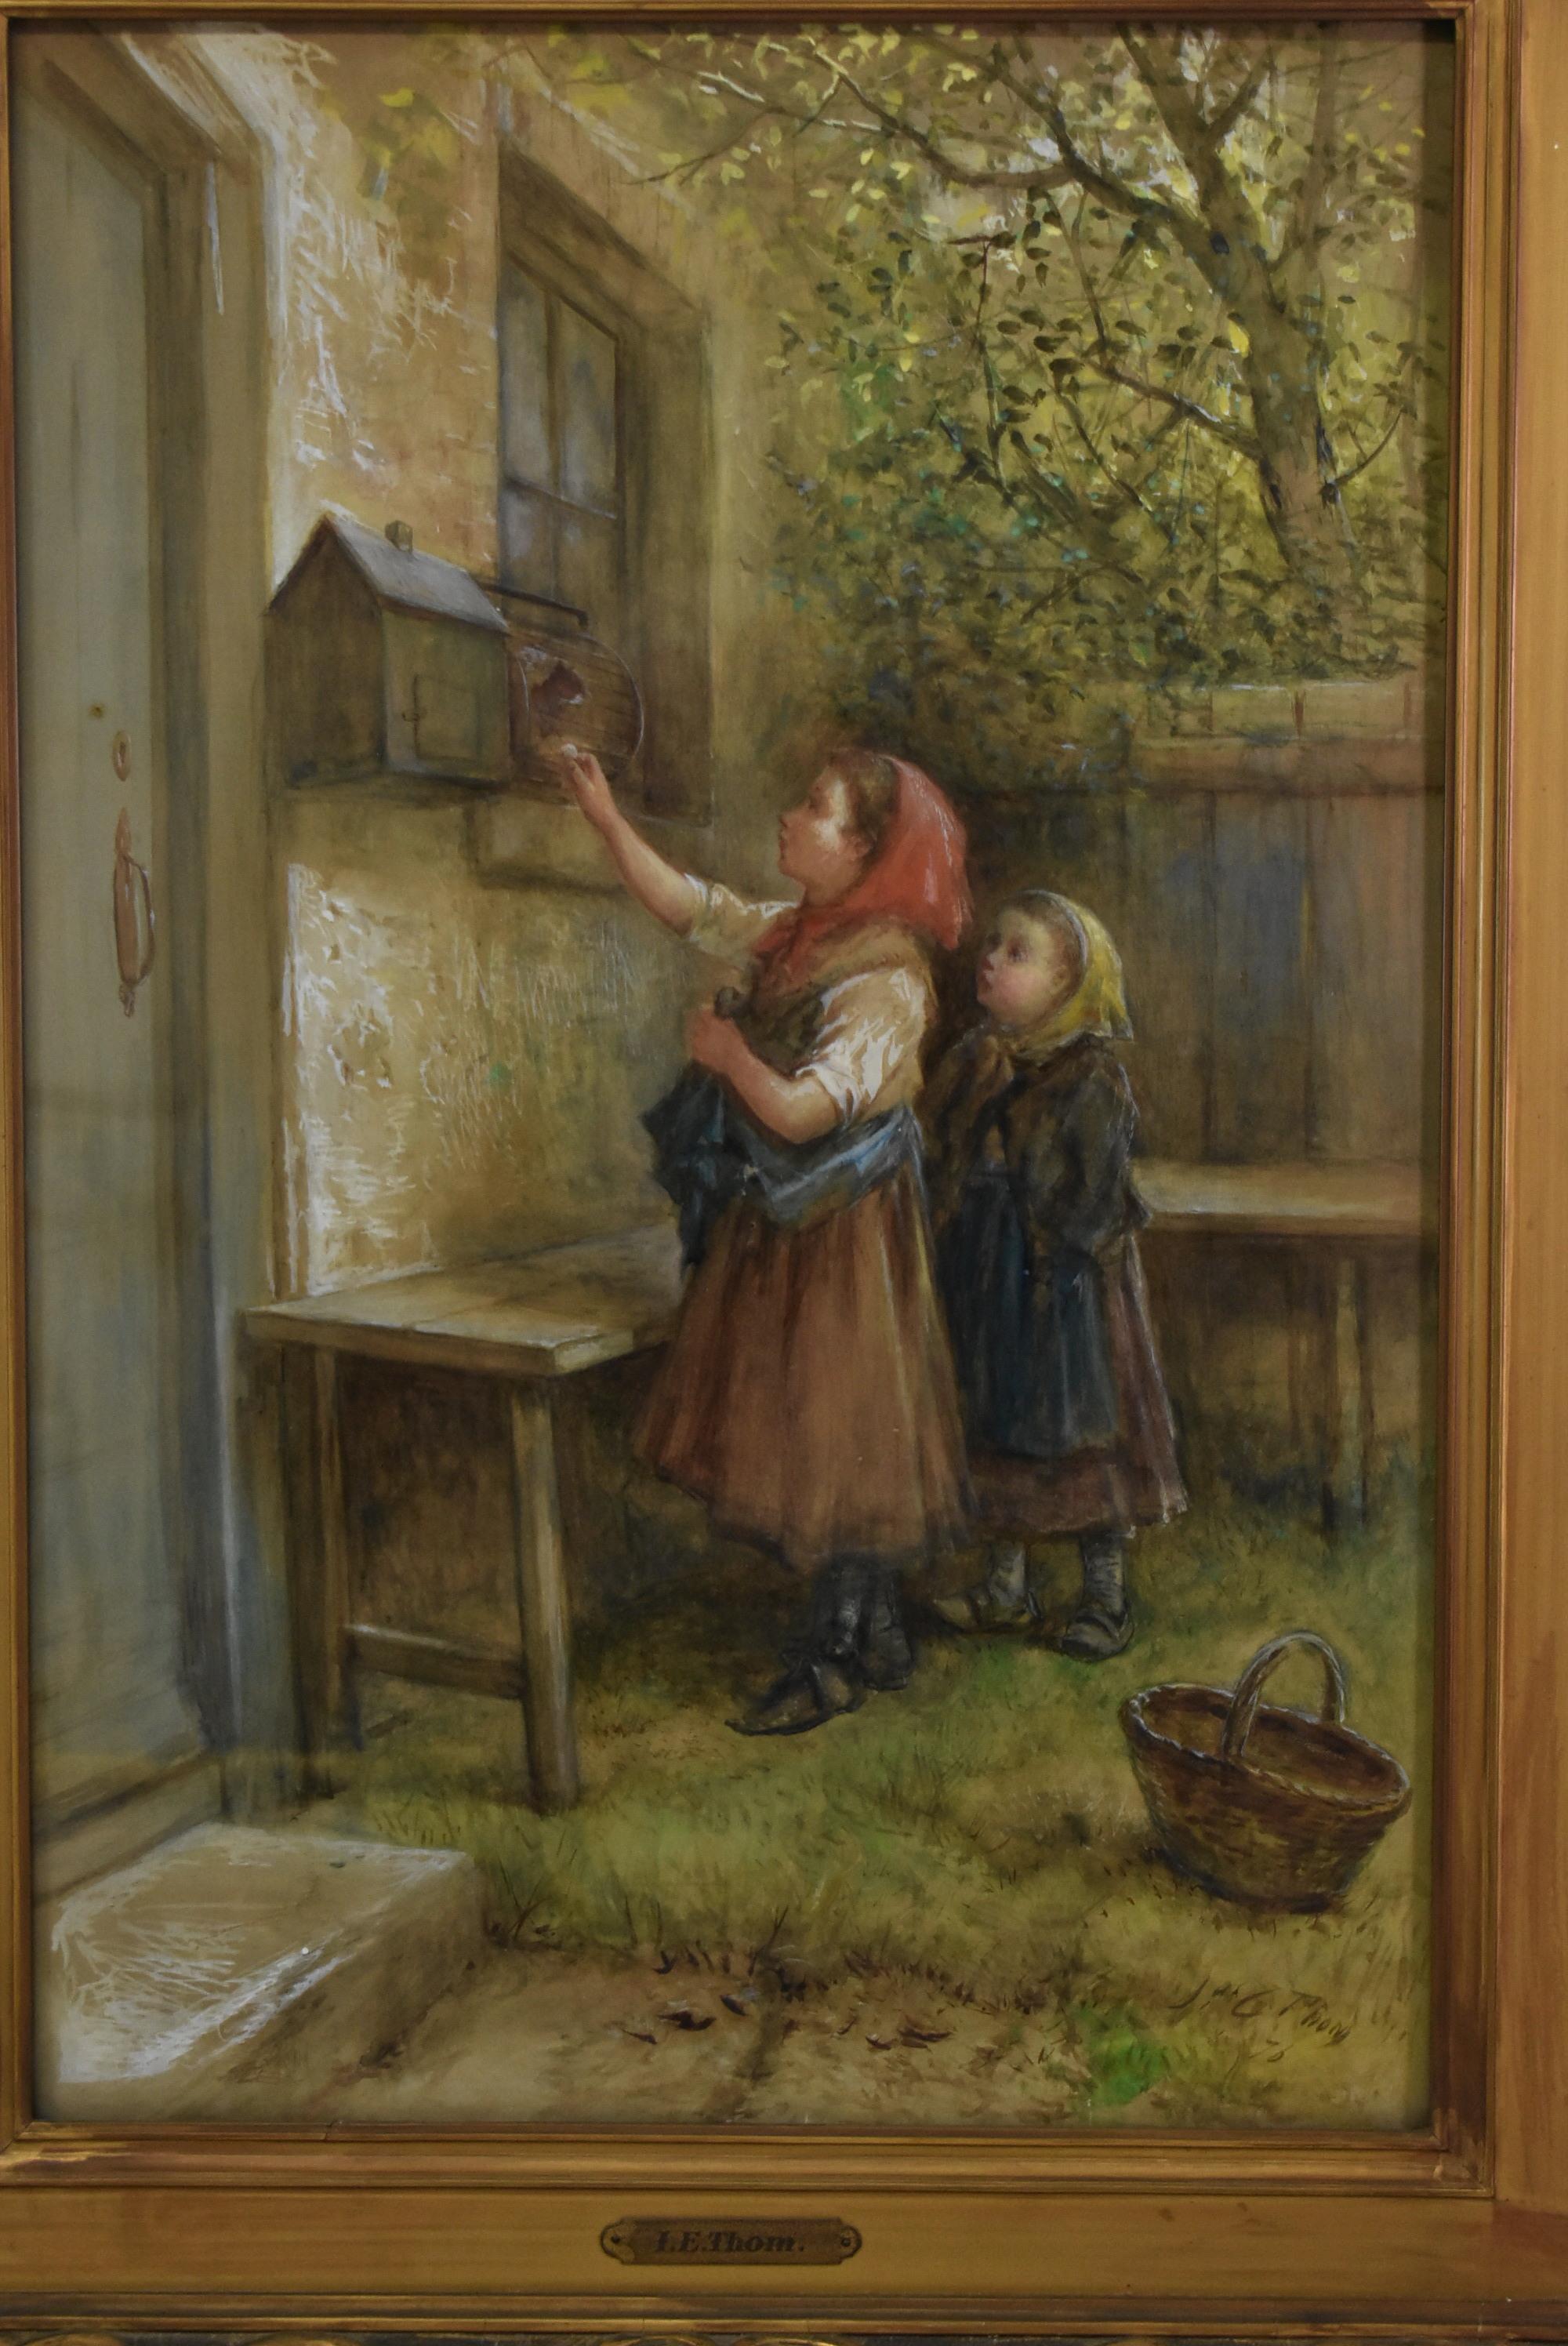 Original Gouche on paper by artist James Crawford Thom 1835-1898. Two girls in backyard feeding a squirrel in a wheel cage. Nice details. Signed lower right. J. C. Thom.